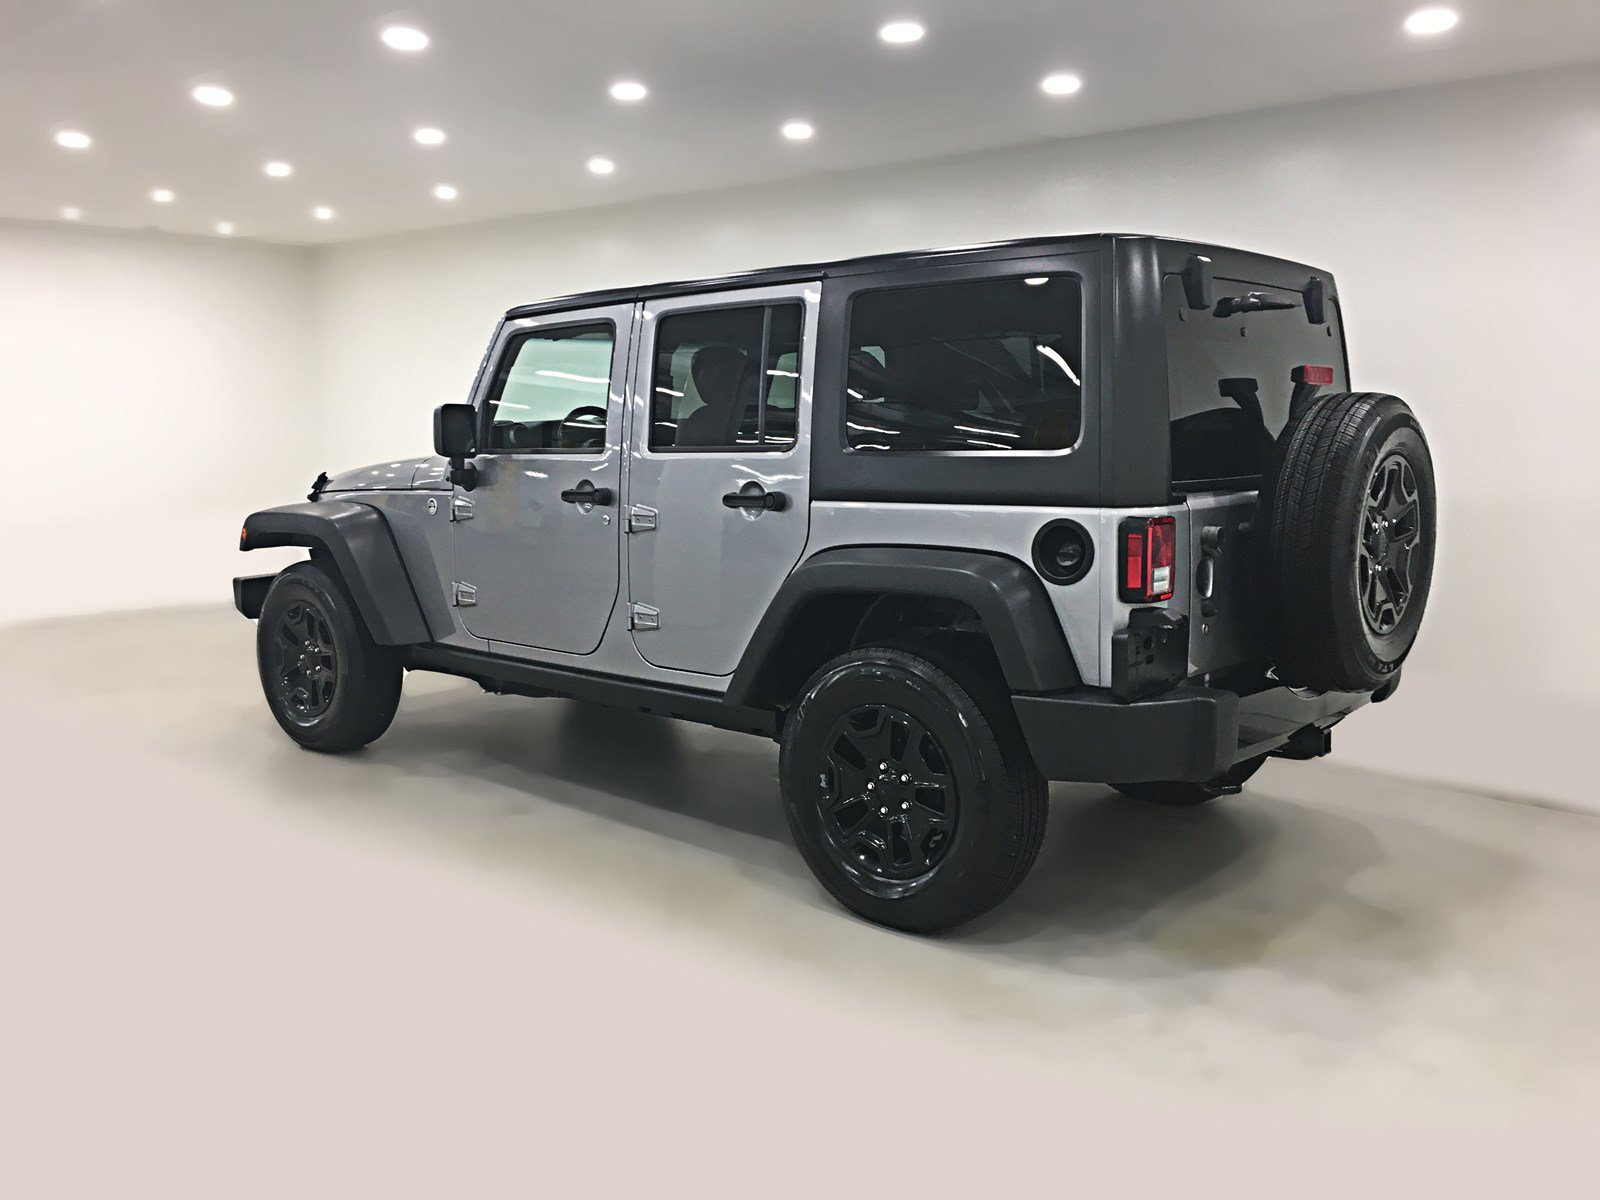 Used 2015 Jeep Wrangler Unlimited Willys Convertible near Moose Jaw #19W29A 2015 Jeep Wrangler 2 Door Towing Capacity